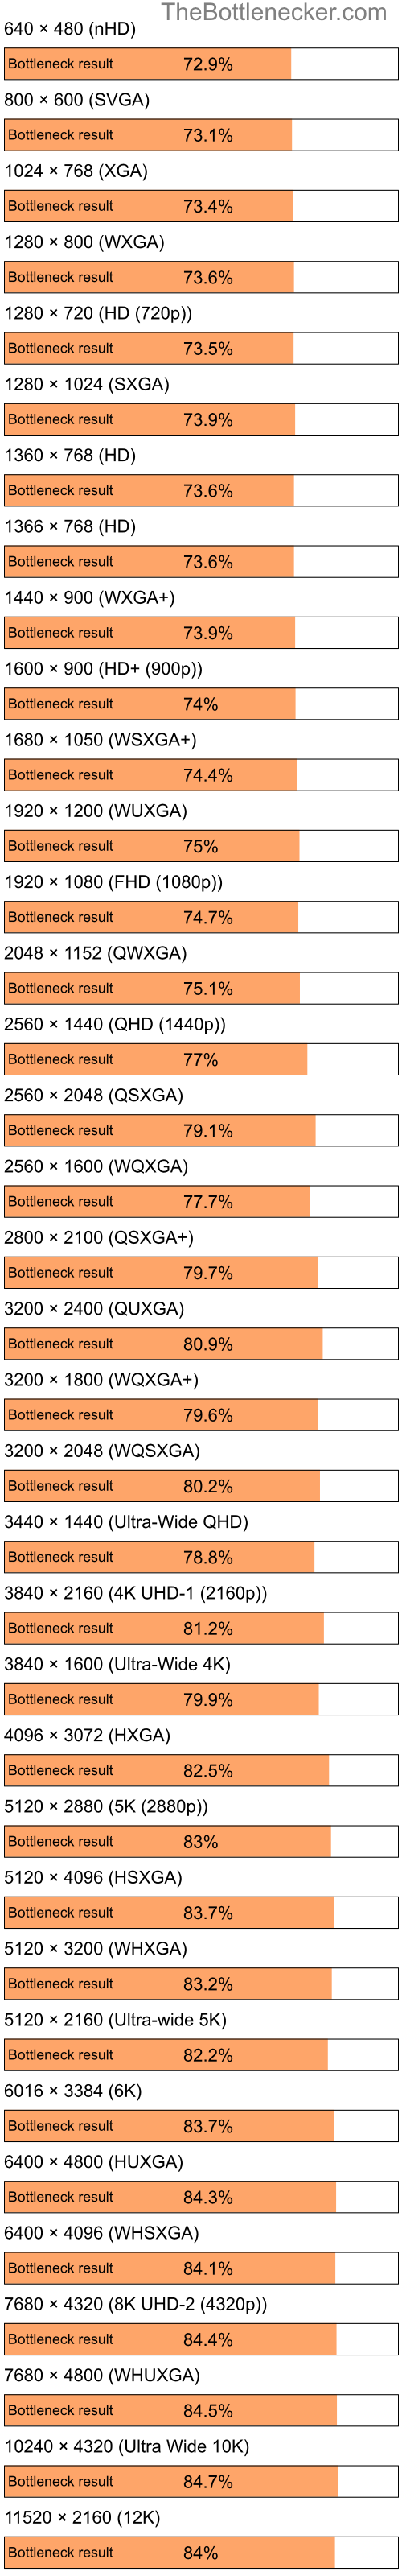 Bottleneck results by resolution for Intel Atom Z520 and AMD Radeon X700 PRO in Graphic Card Intense Tasks